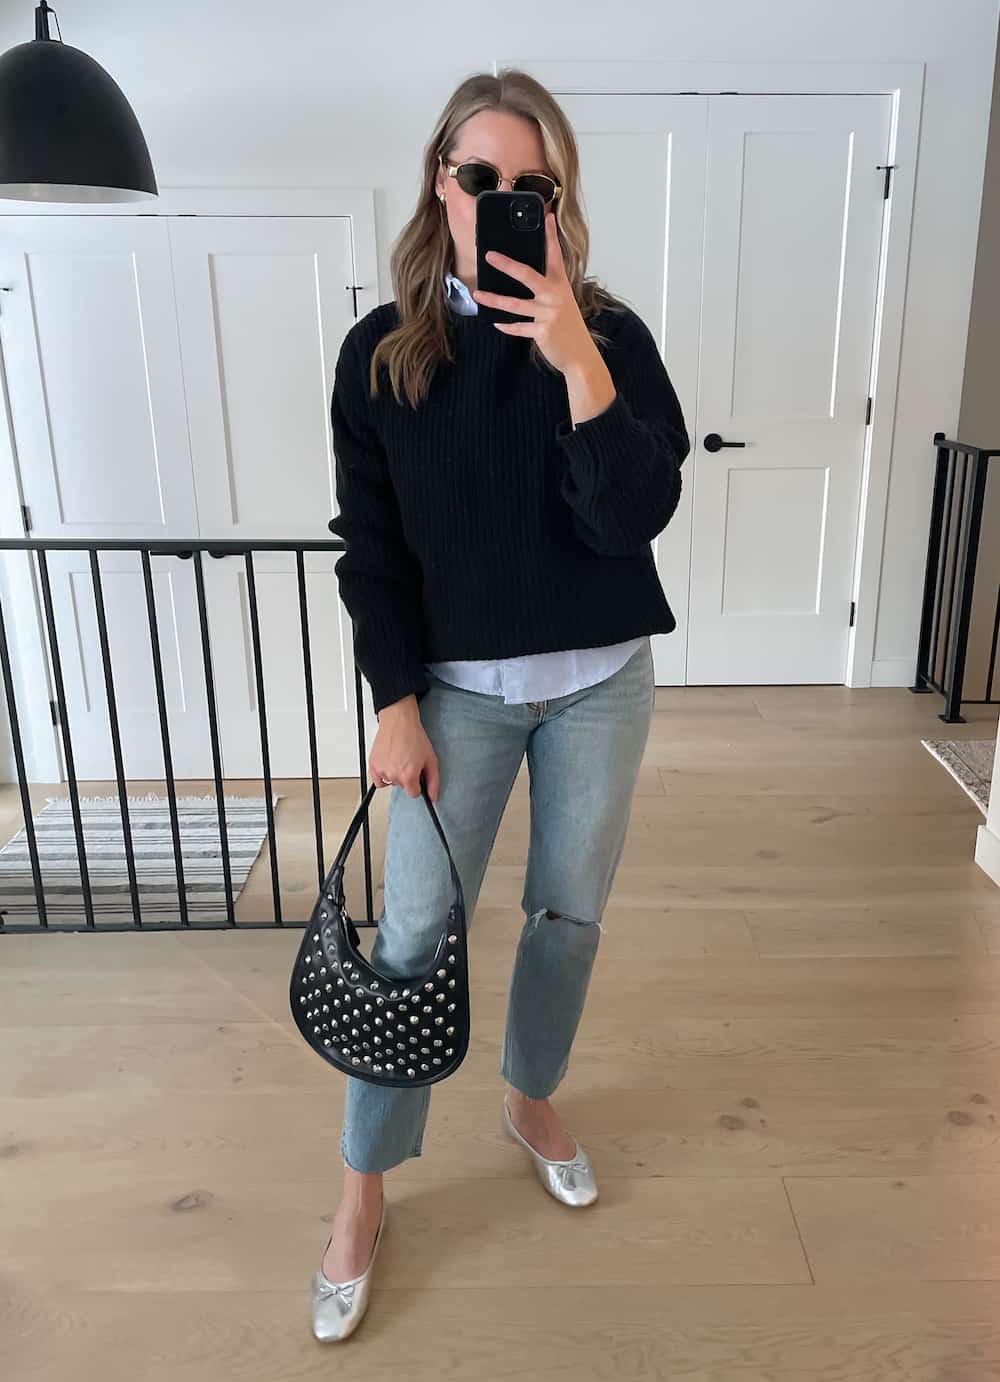 Christal wearing jeans, silver ballet flats and a blue button down under a black sweater with black accessories.